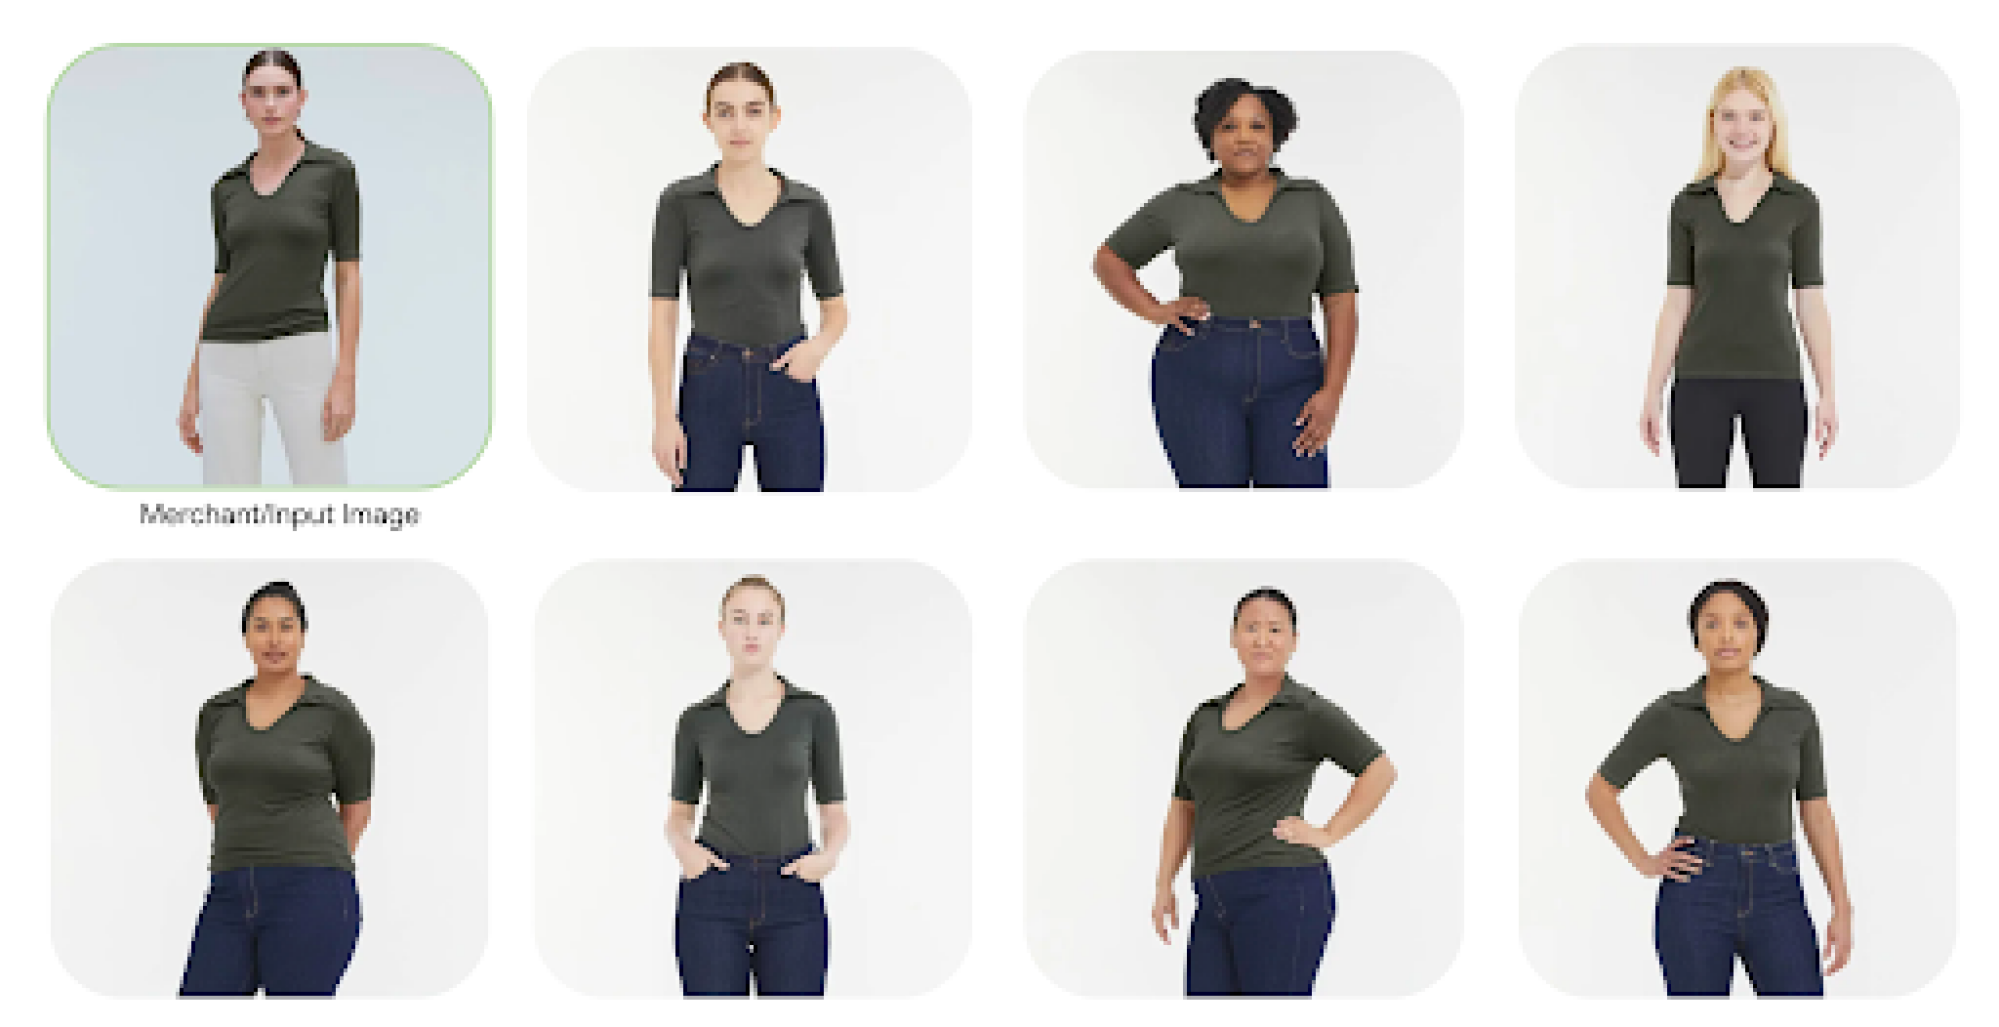 Eight models of different body types and races all wearing the same green shirt. 